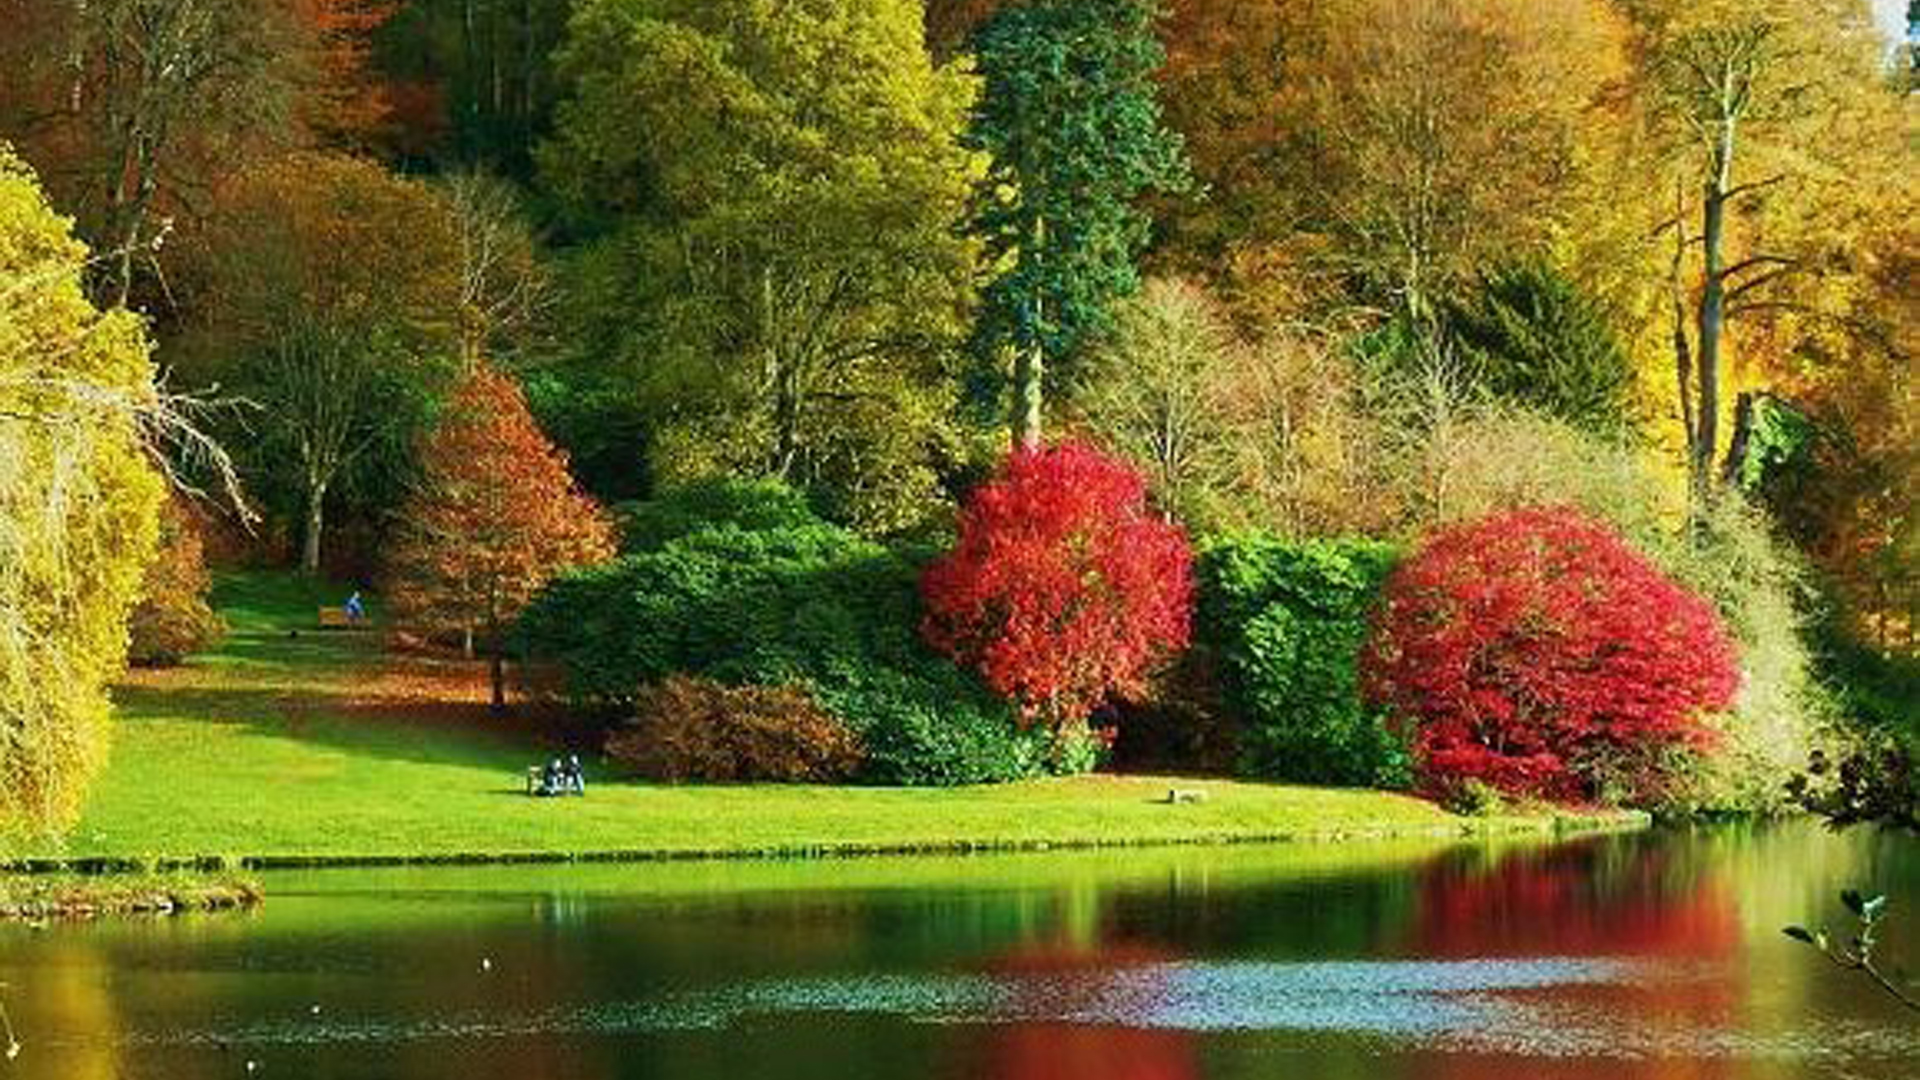 Colorful Fall Autumn Trees Bushes Green Grass Field Reflection On River During Daytime 2K Autumn